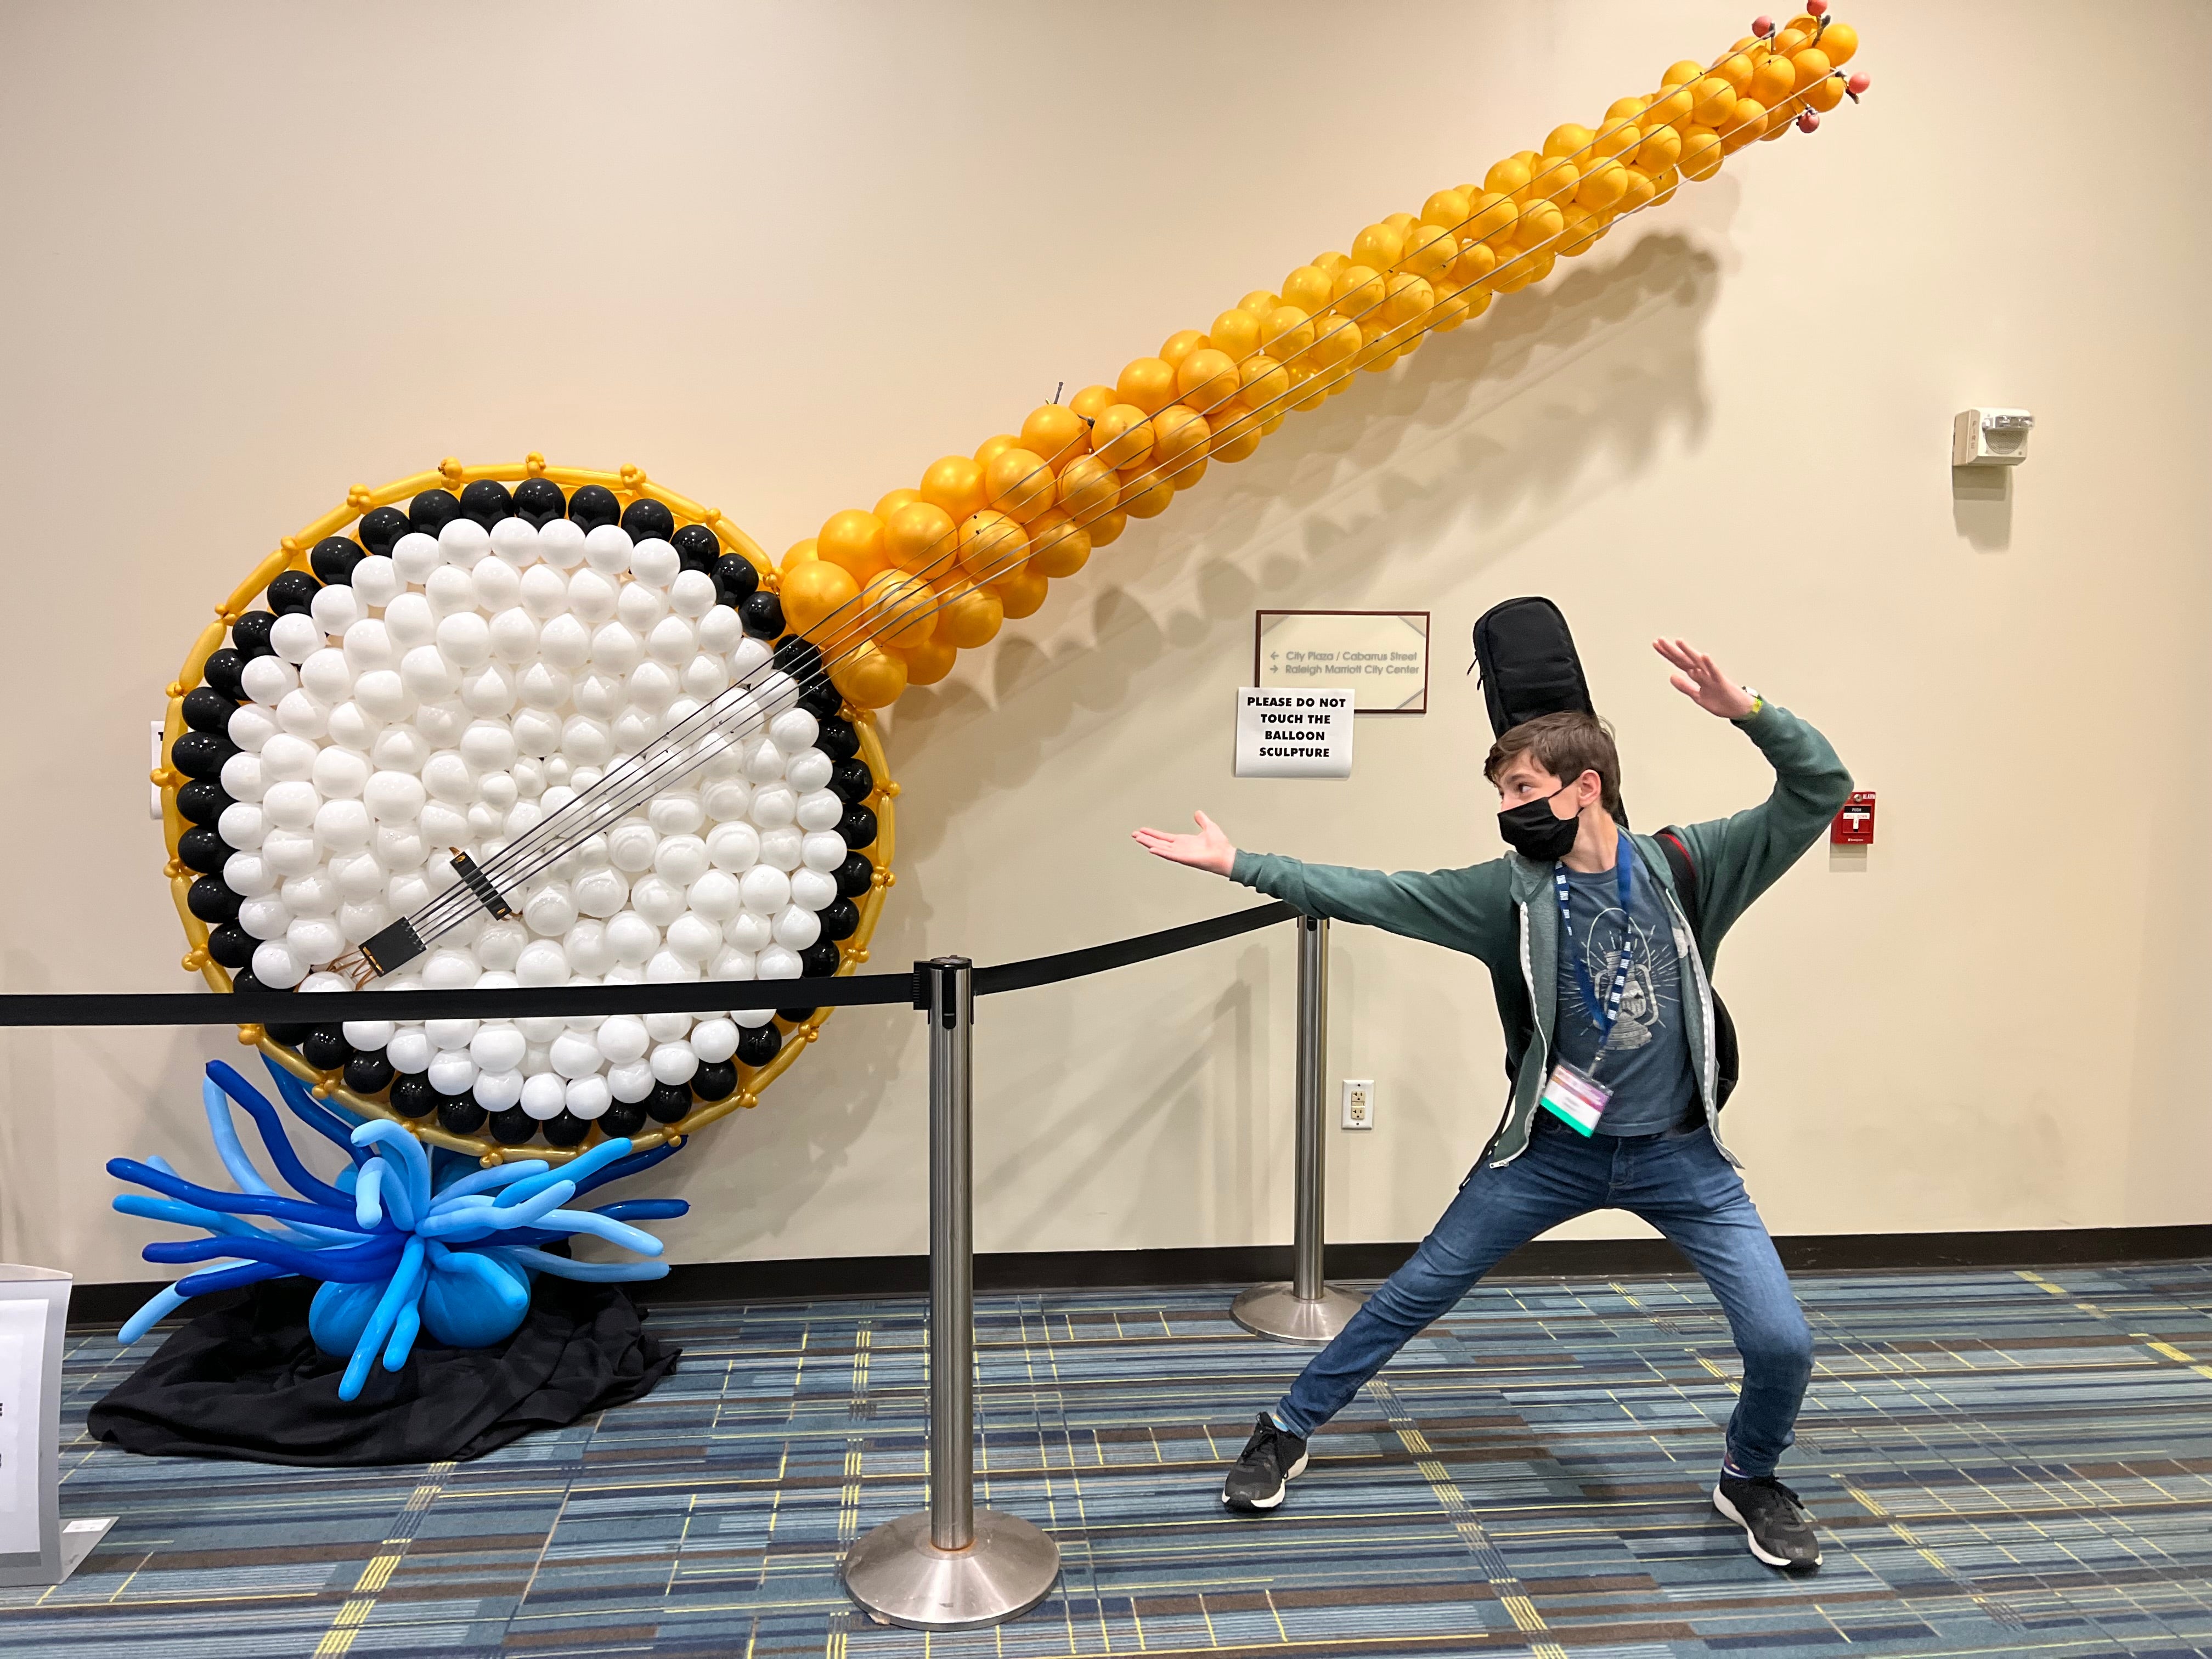 Image of the author, 14-year-old Nikolai Margulis, posing in front of the IBMA World of Bluegrass banjo balloon art display.